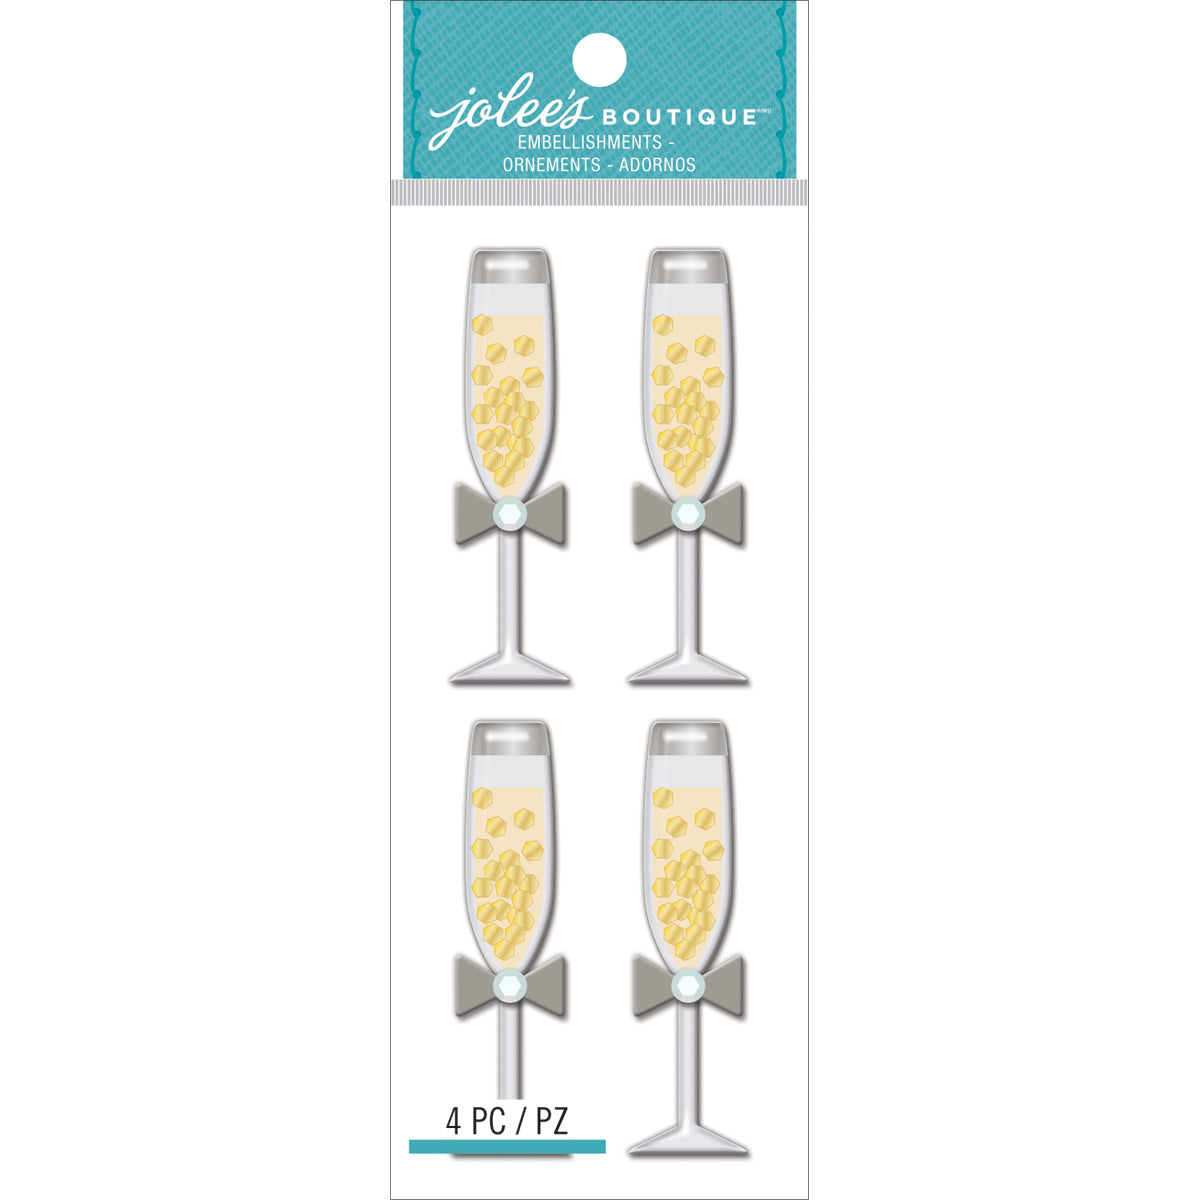 Jolee's Boutique Dimensional Stickers-Champagne Glasses